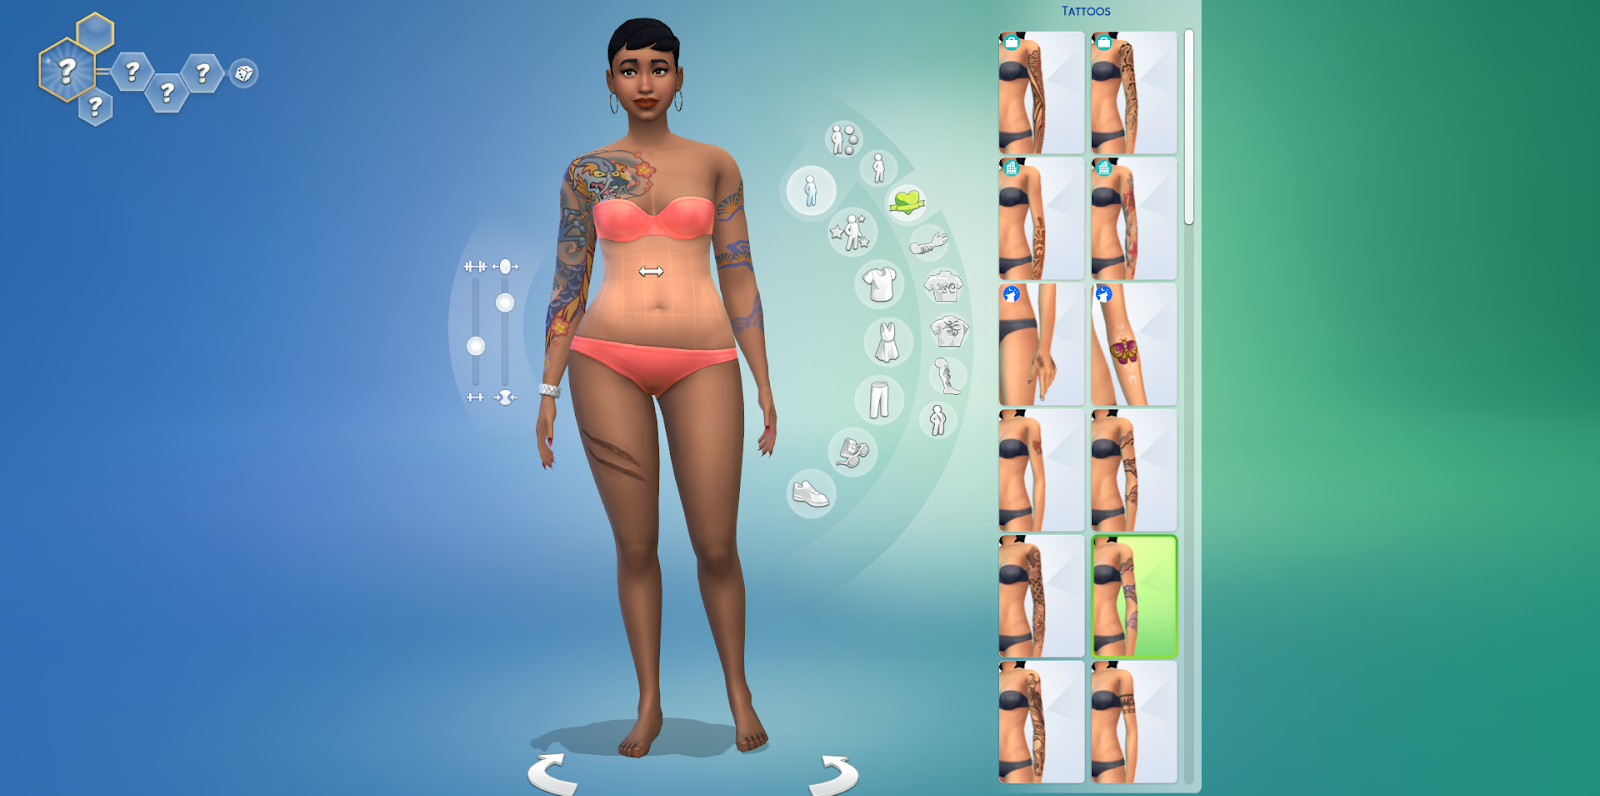 The Sims 4’s Create-a-Sim mode shows a tattooed Sim selecting clothing options